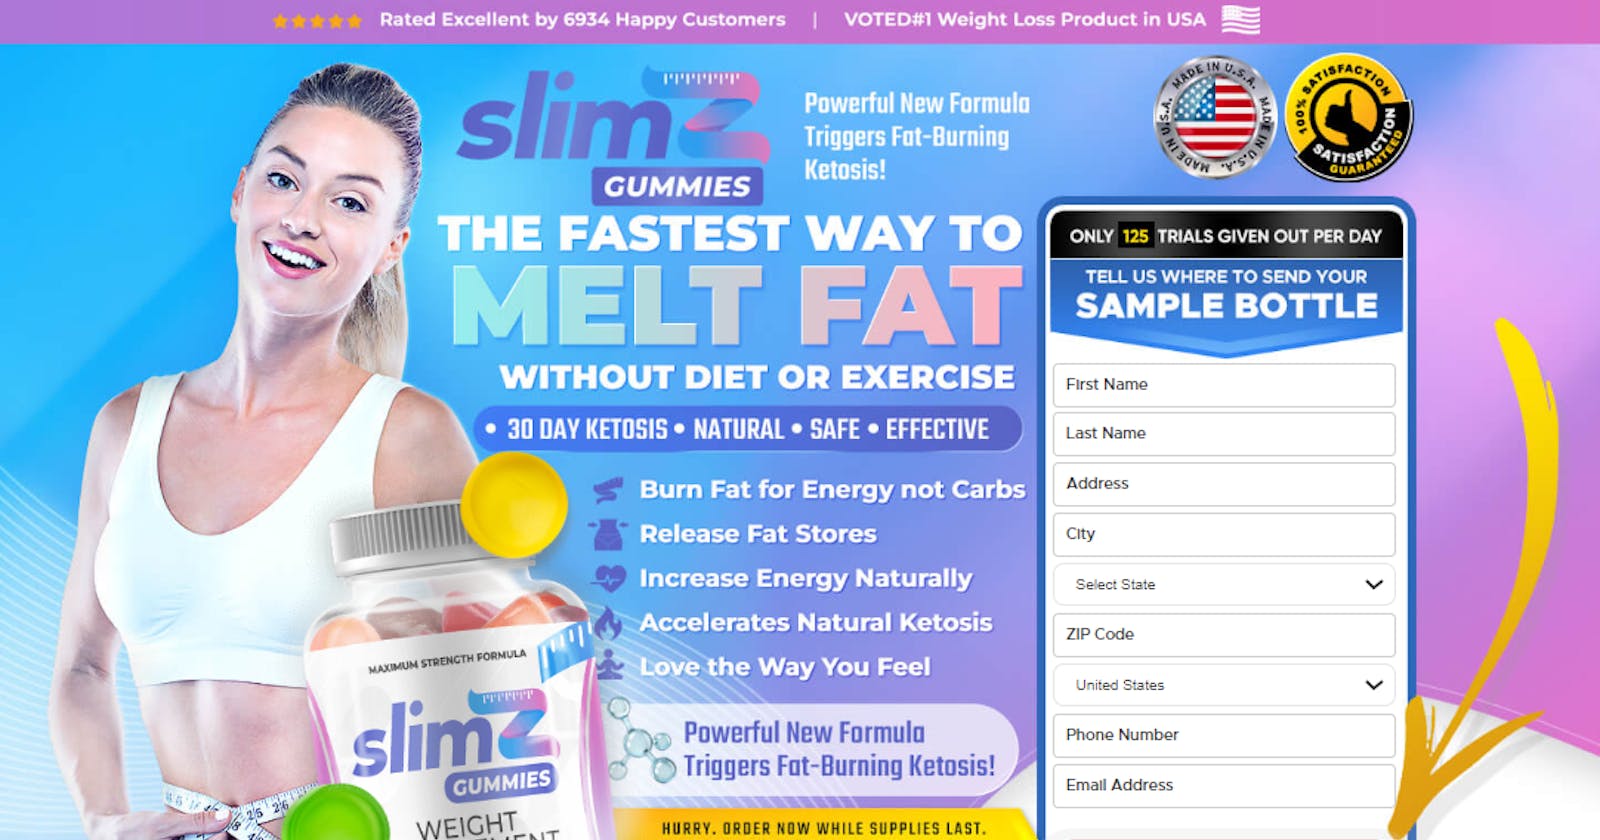 Slimz Keto Gummies: Is it Effective in Improving Weight Loss Health?